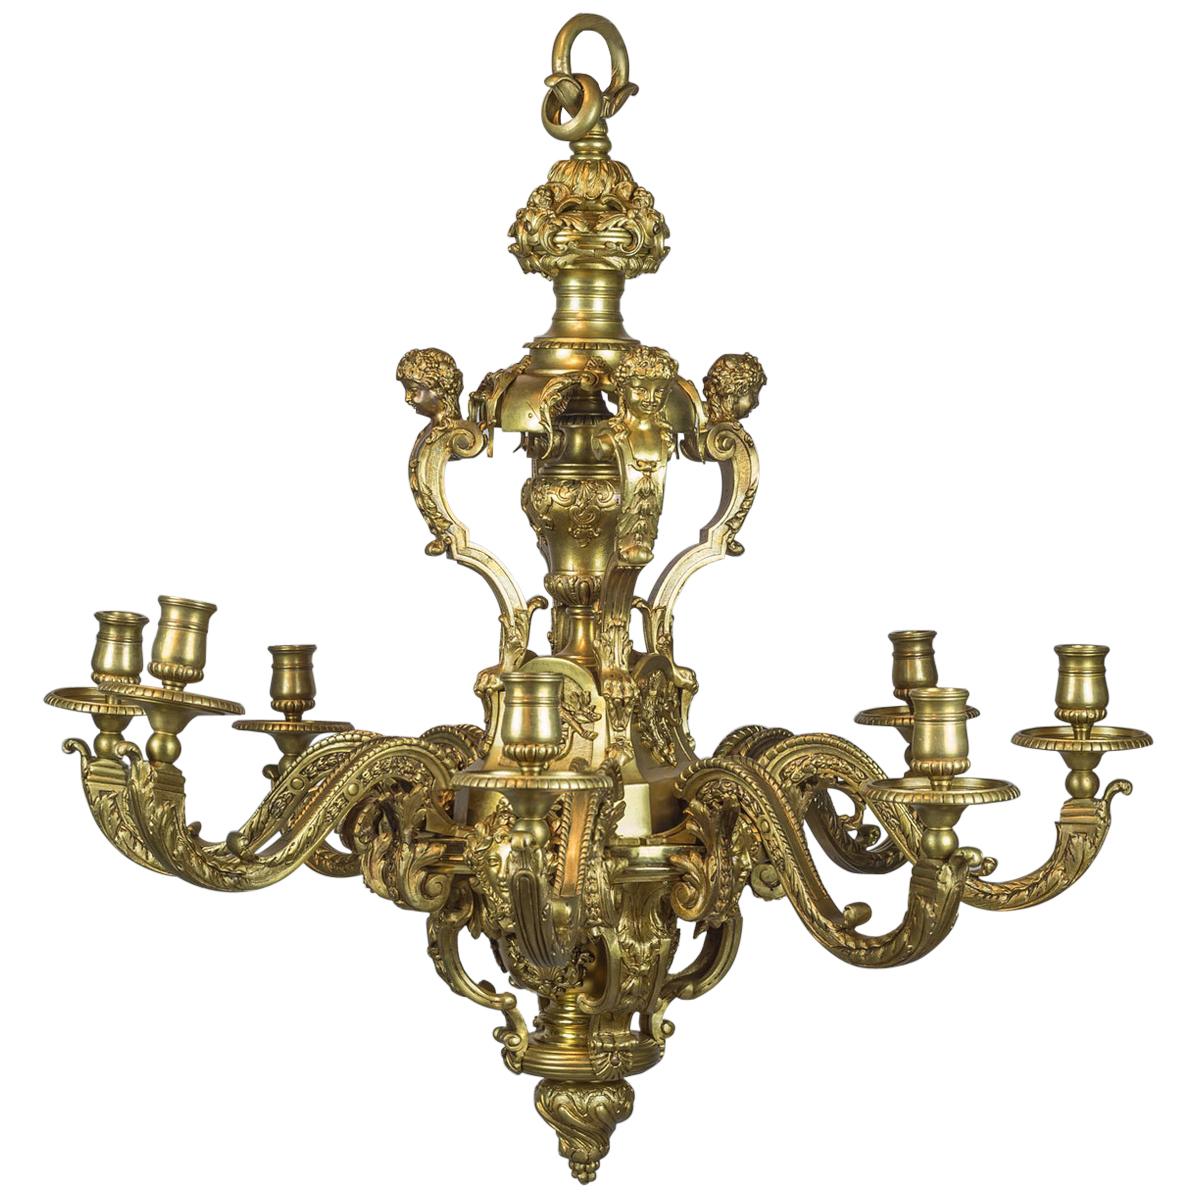 High Quality of Regence Style Gilt-Bronze Chandelier, circa 1900 For Sale